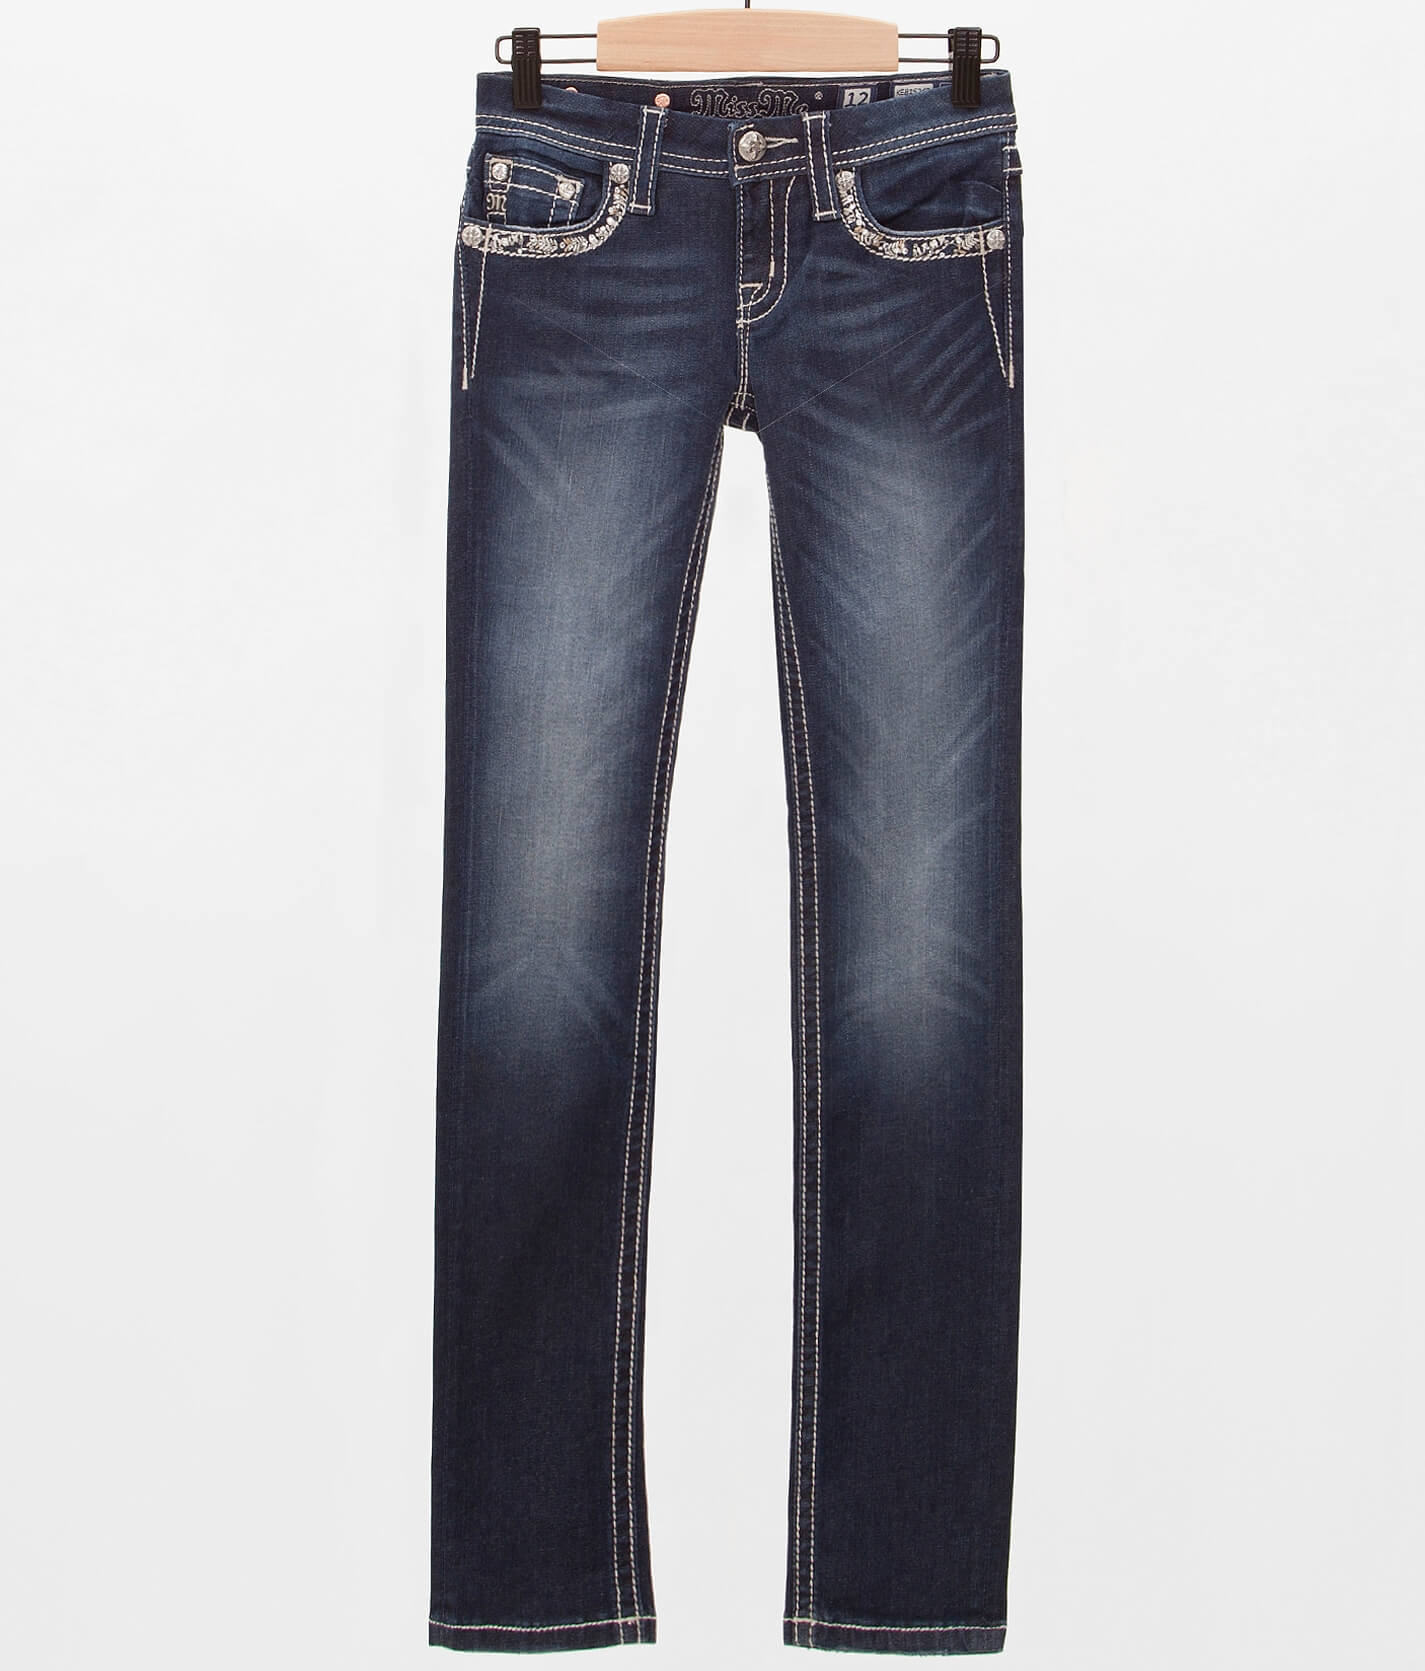 size 8 in miss me jeans